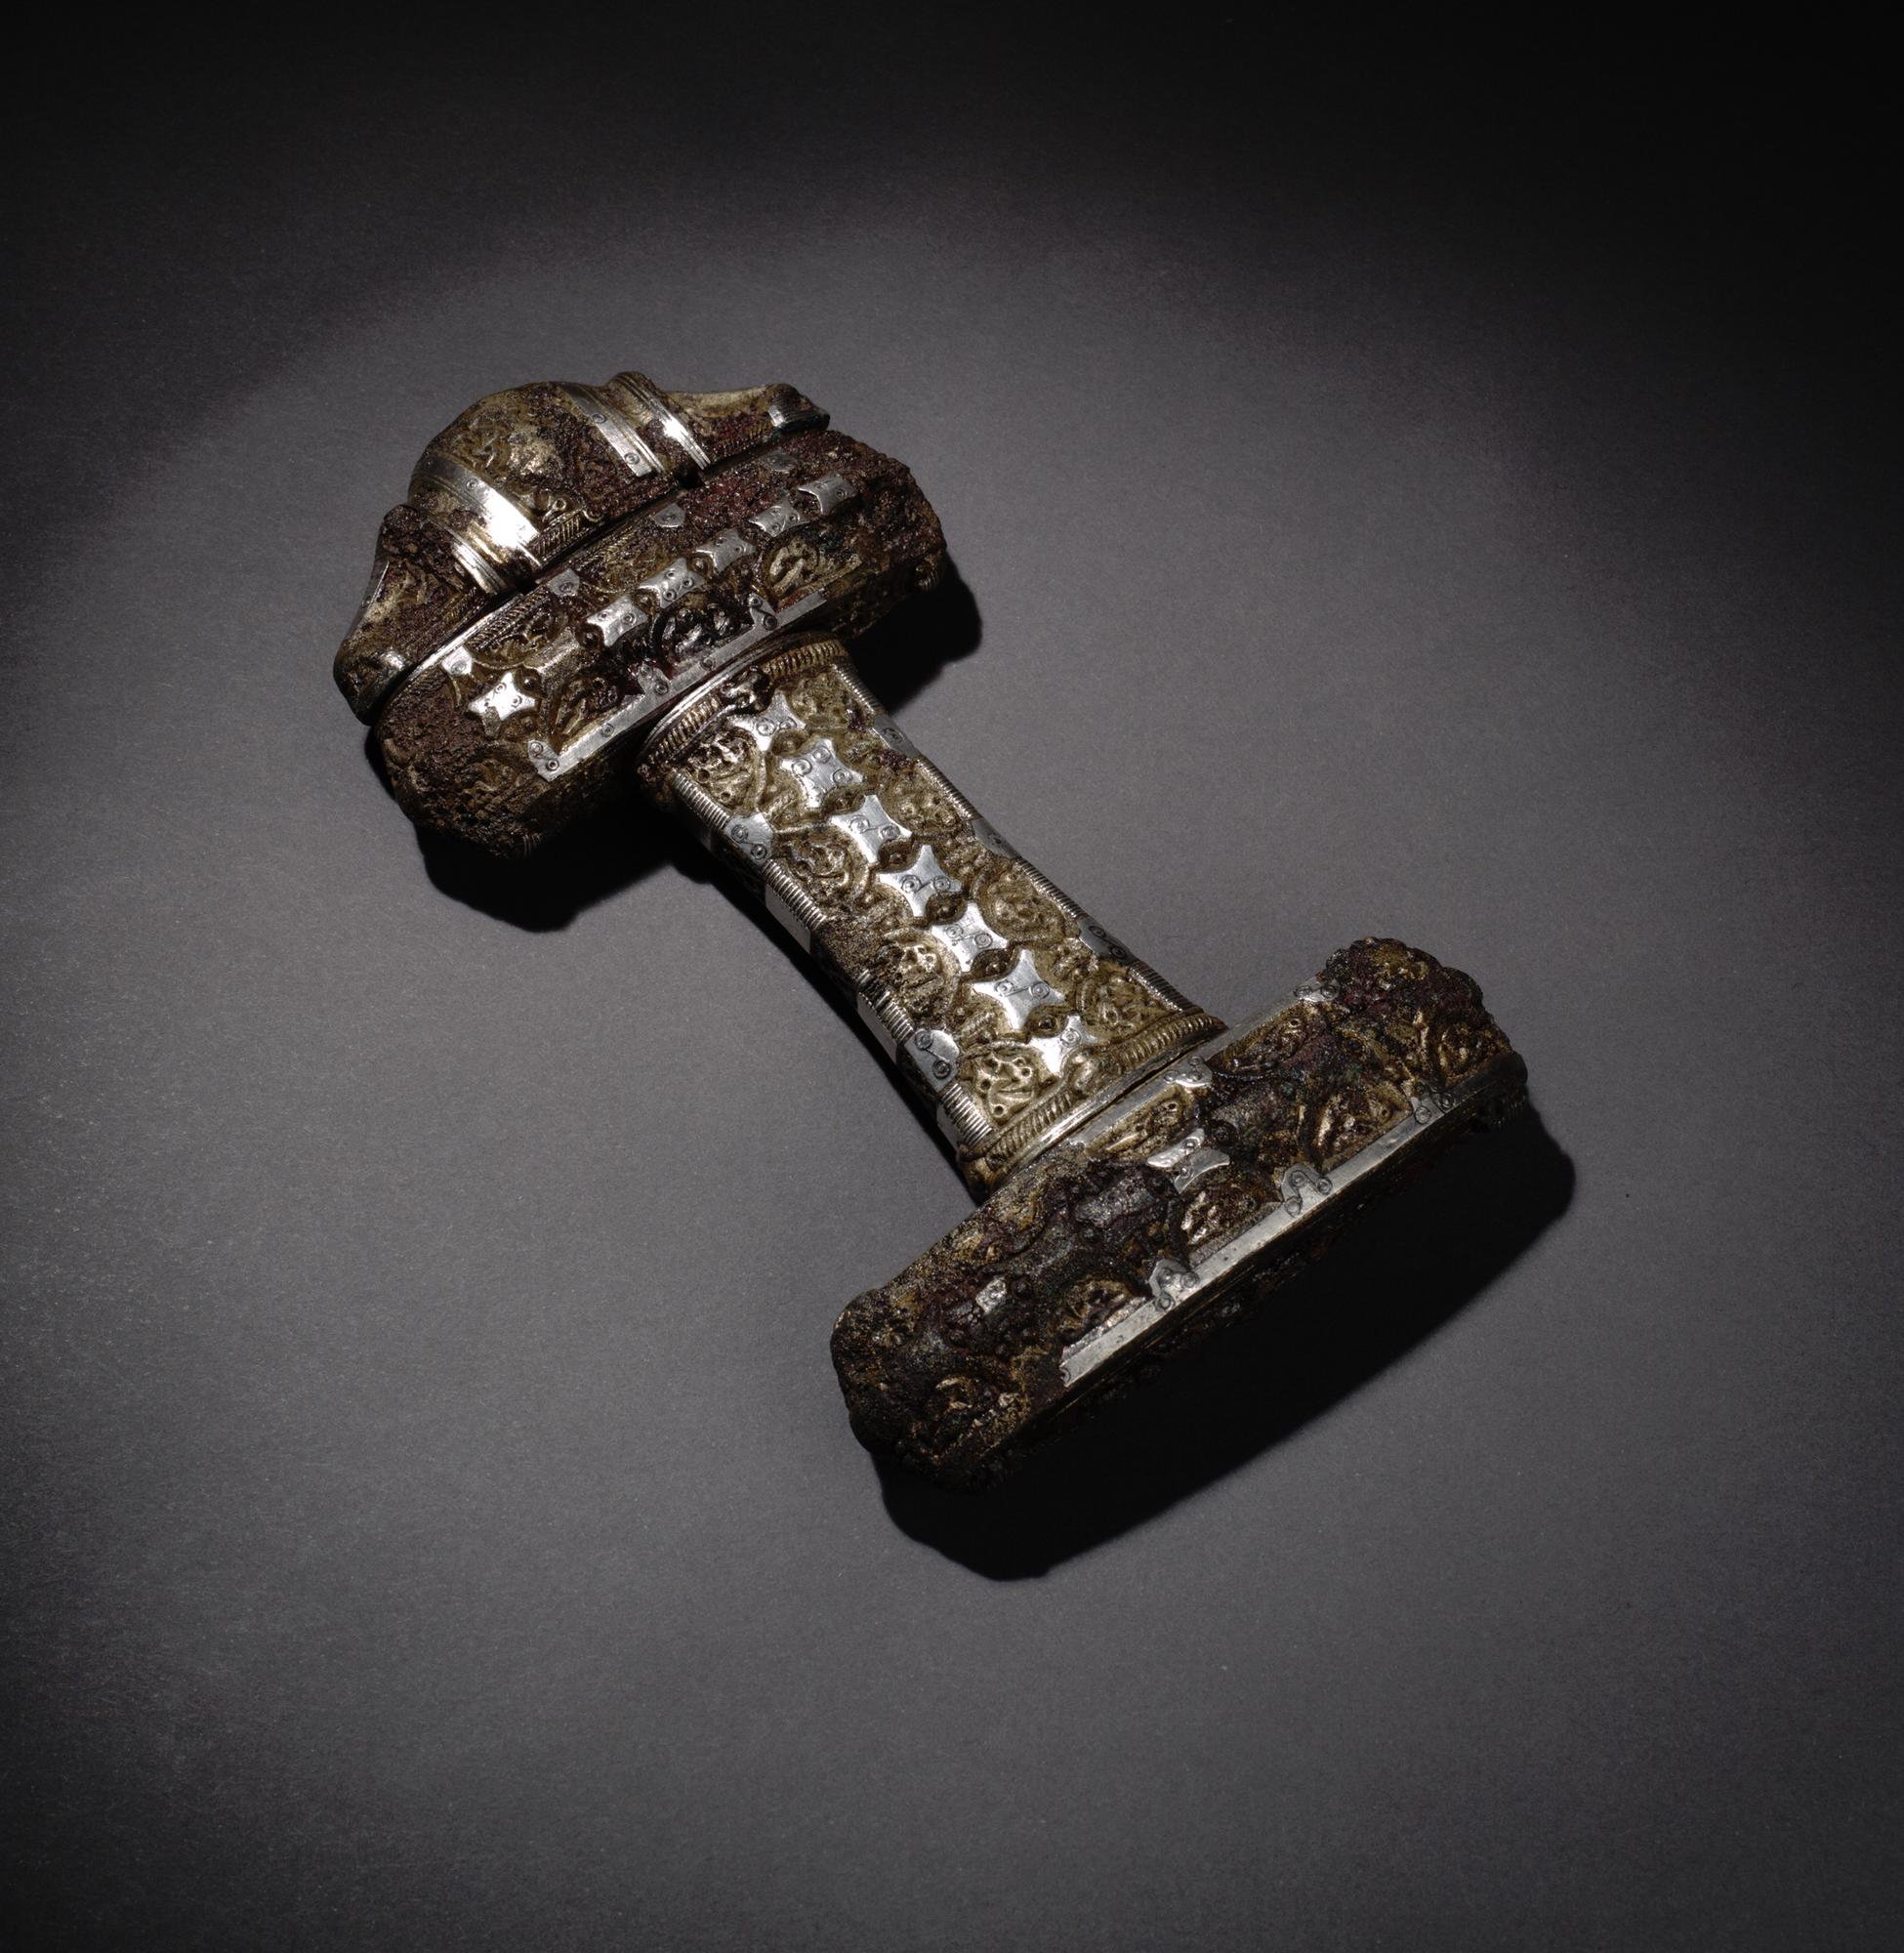 Viking sword hilt of bronze inlaid with silver, from Eigg, 9th century